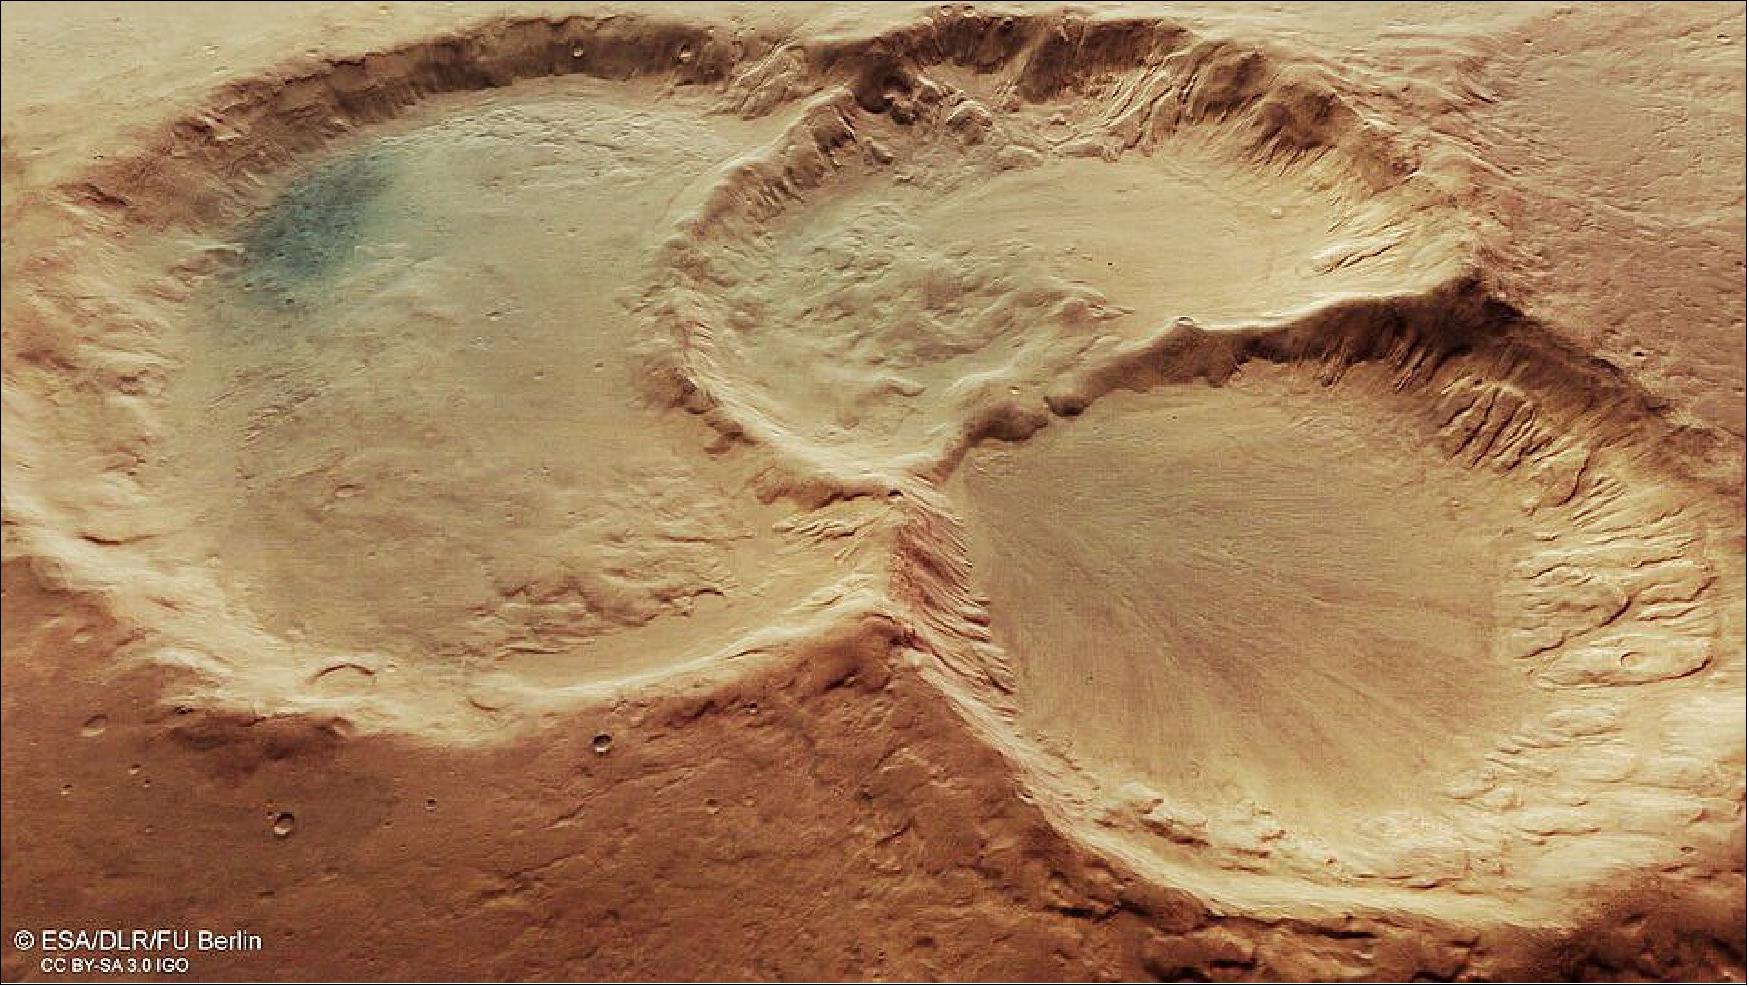 Figure 71: Perspective view of triple martian crater. This image provides a perspective view of a triple crater in the ancient martian highlands. It comprises data gathered by ESA’s Mars Express on 6 August 2020 during orbit 20982. The ground resolution is approximately 15 m/pixel and the images are centered at about 19ºE/37ºS. This image was created using data from the nadir and color channels of the High Resolution Stereo Camera (HRSC). The nadir channel is aligned perpendicular to the surface of Mars, as if looking straight down at the surface. HRSC stereo imaging was then used to derive the digital elevation model (DTM) upon which this oblique view is based (image credit: ESA/DLR/FU Berlin, CC BY-SA 3.0 IGO)